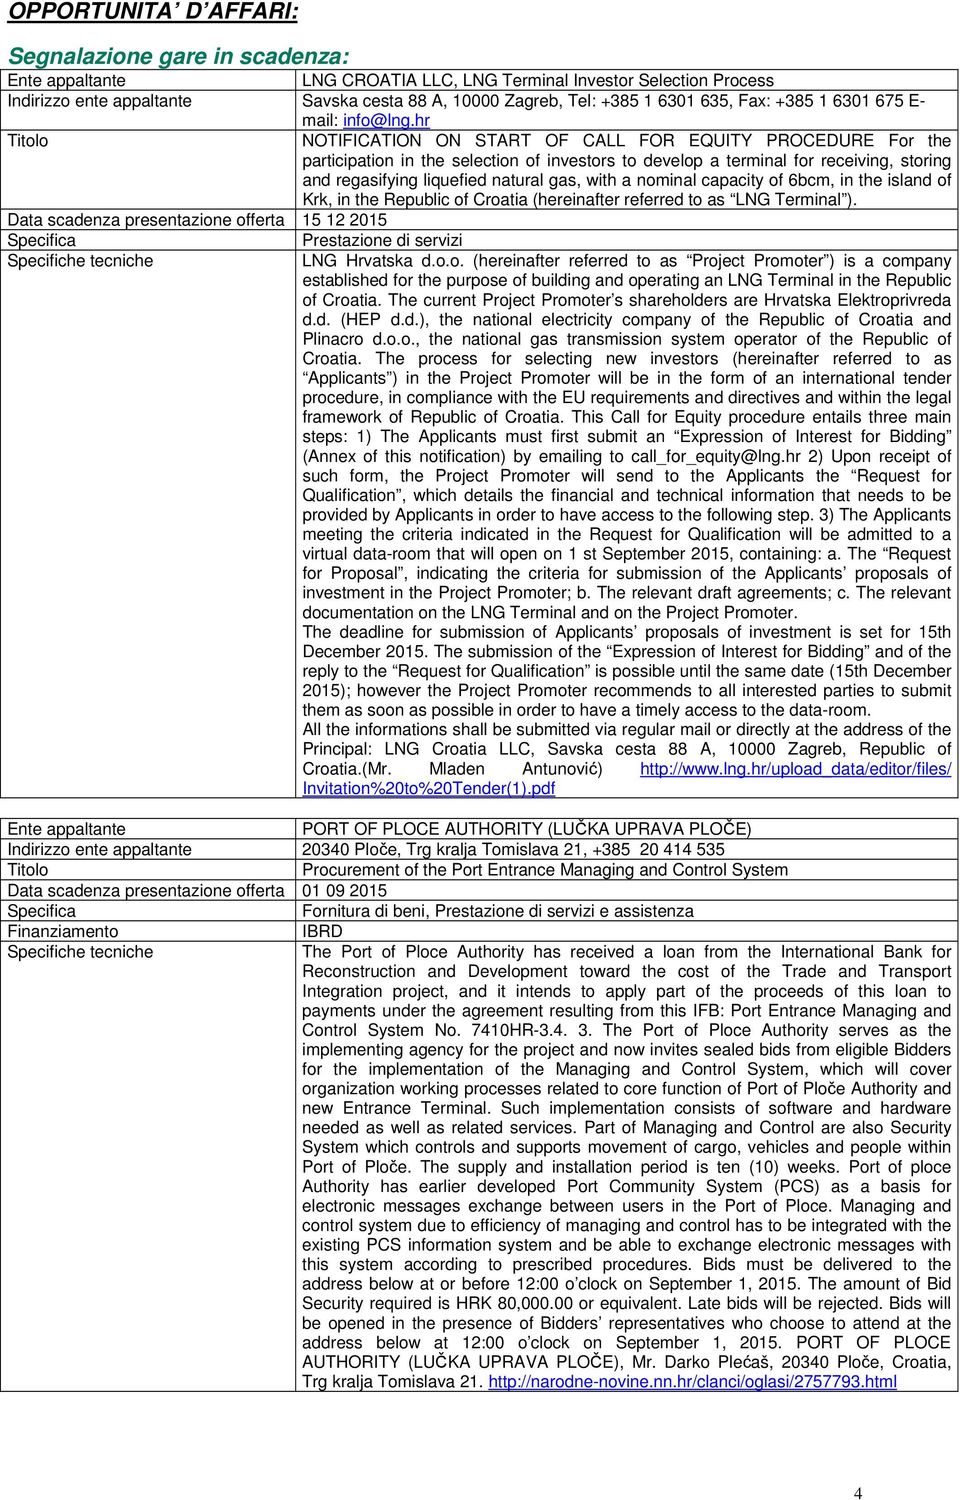 hr NOTIFICATION ON START OF CALL FOR EQUITY PROCEDURE For the participation in the selection of investors to develop a terminal for receiving, storing and regasifying liquefied natural gas, with a